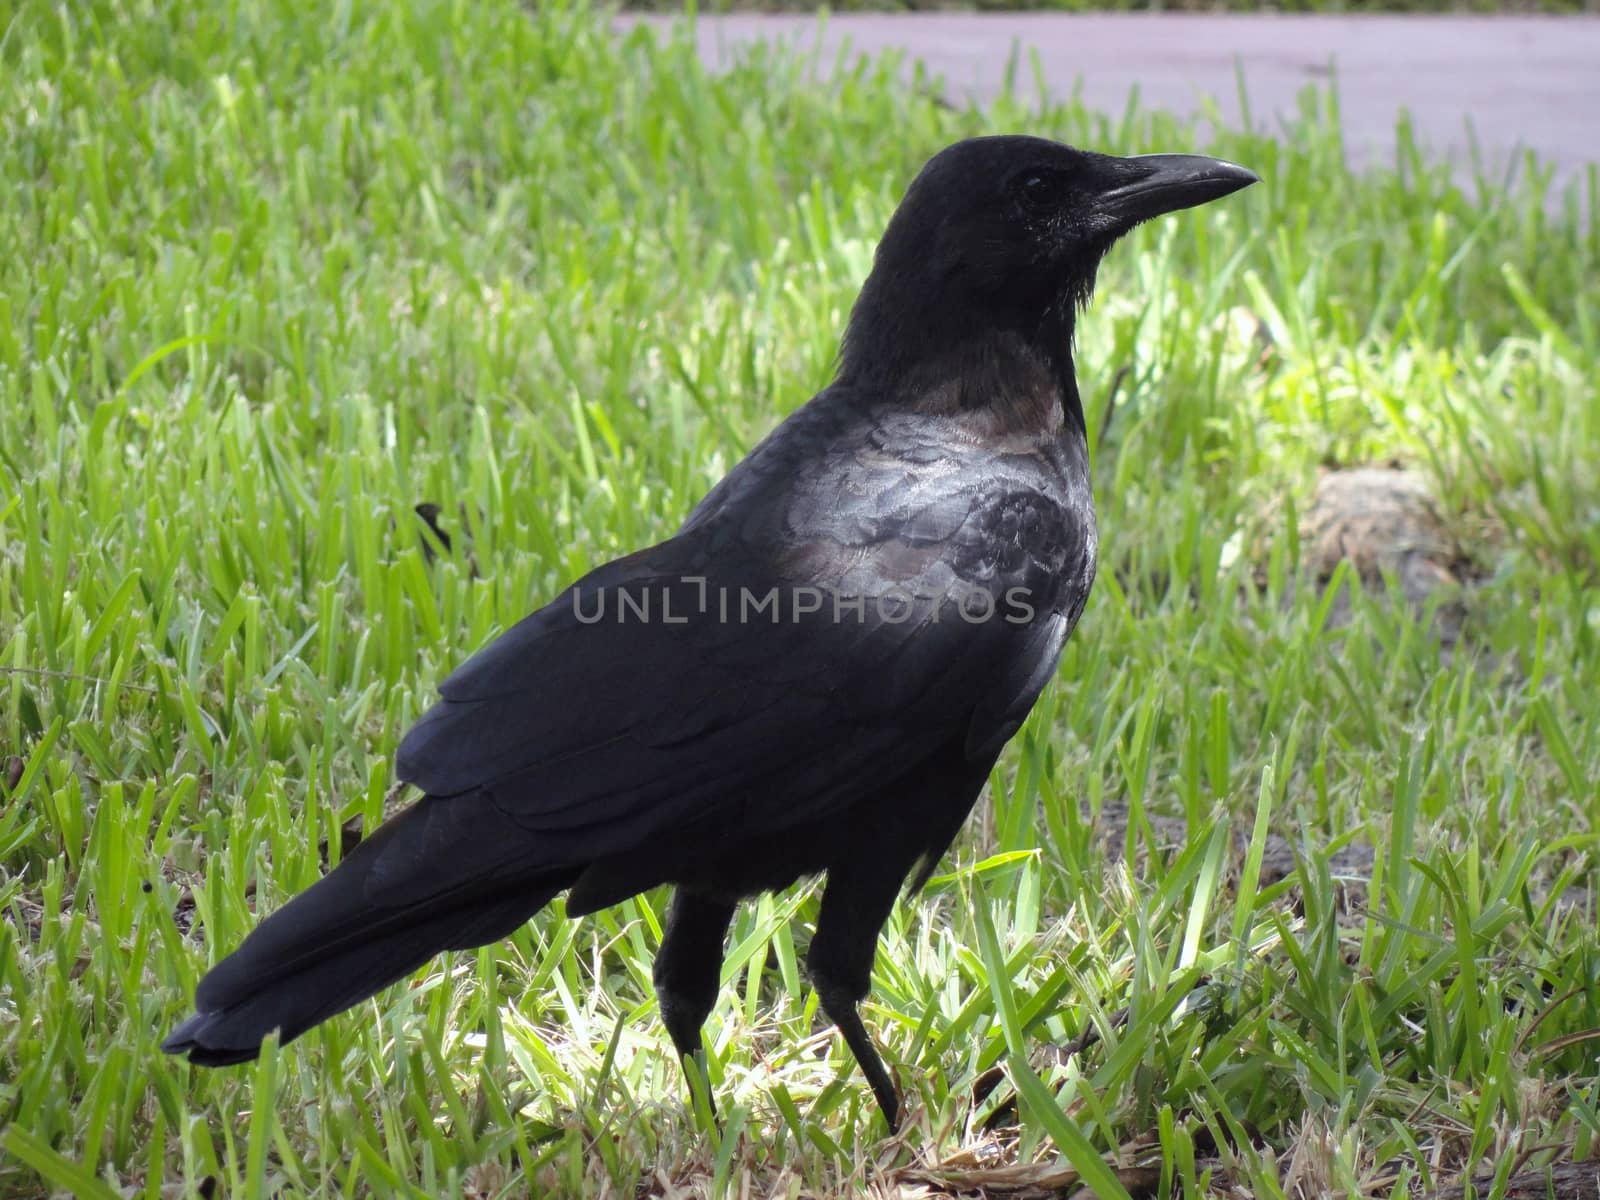 Black Crow in the Grass by bensib